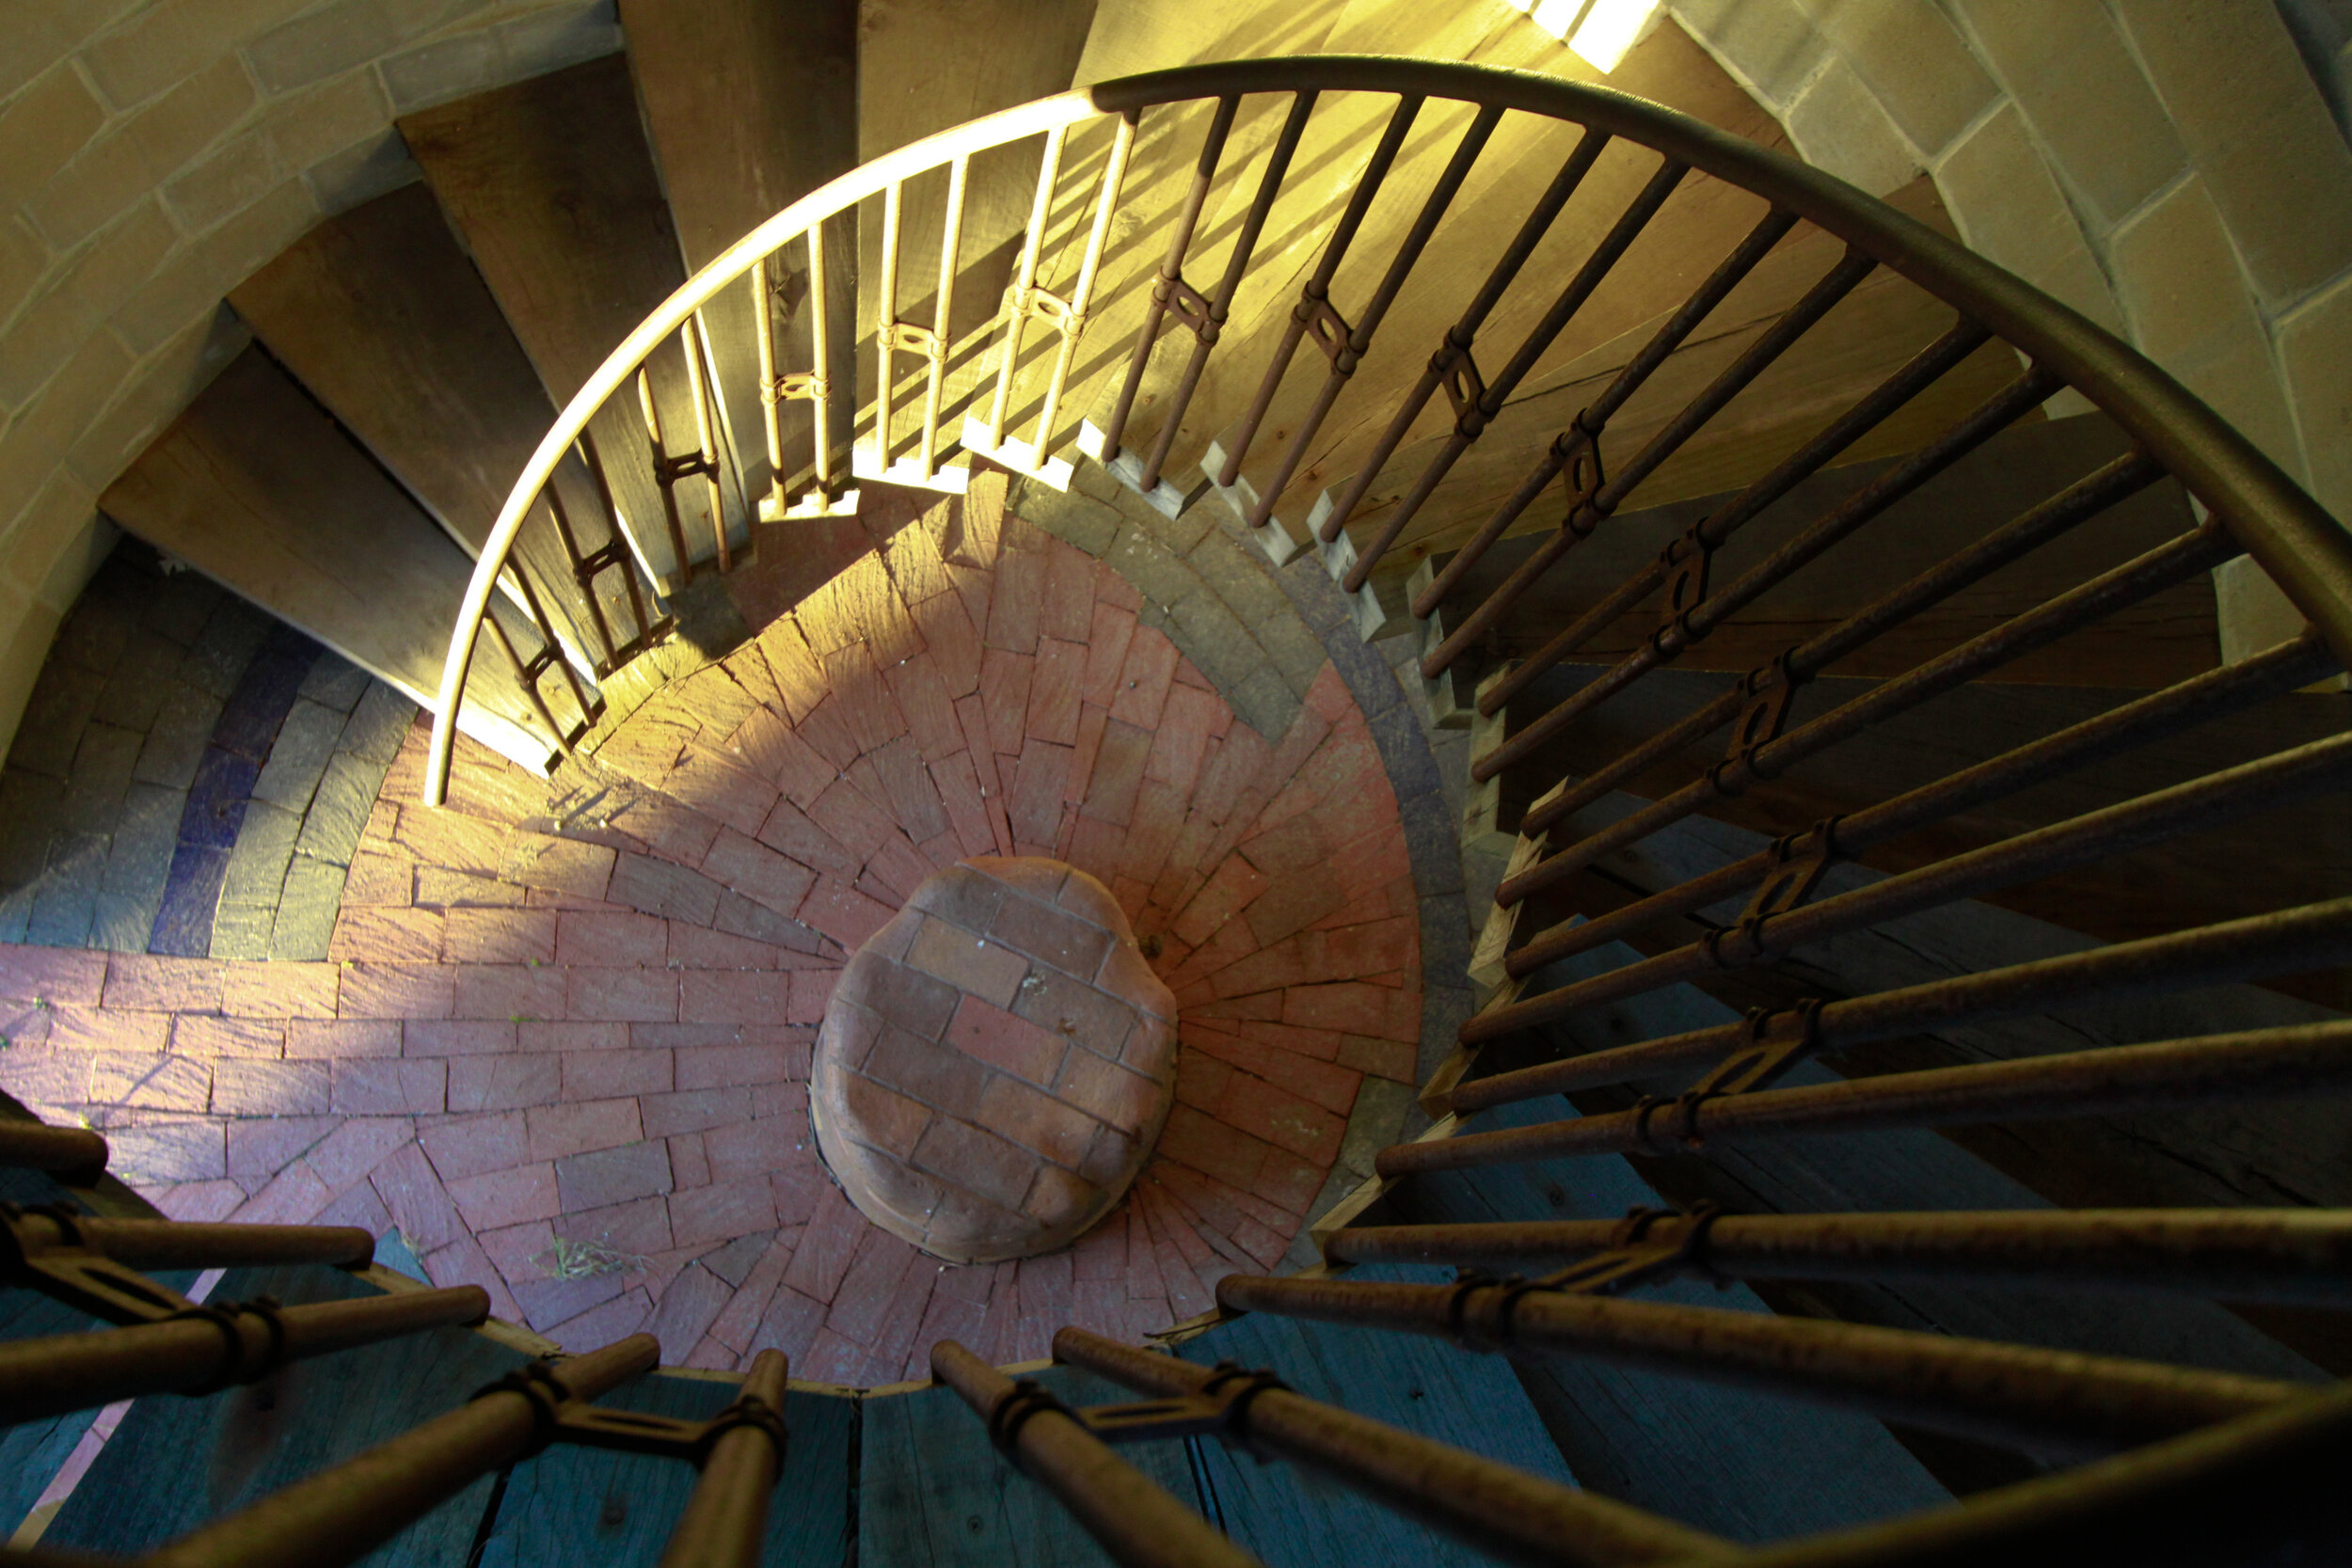 looking down the spiral staircase on interior of silo by Michael Morgan